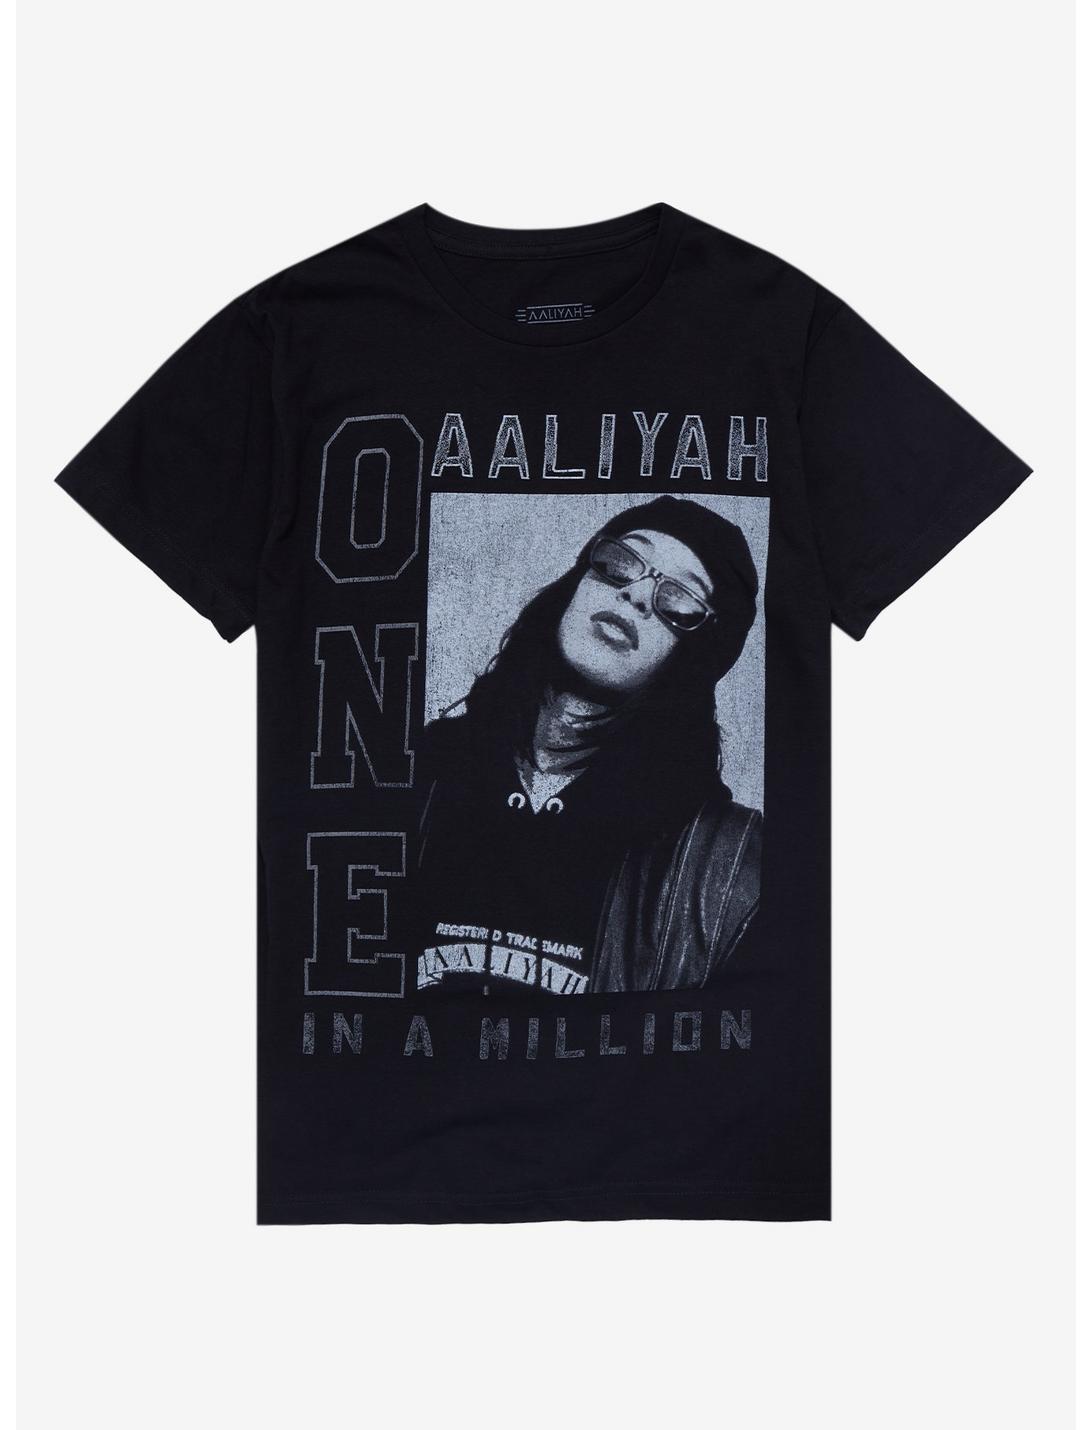 Aaliyah One In A Million Portrait T-Shirt, BLACK, hi-res